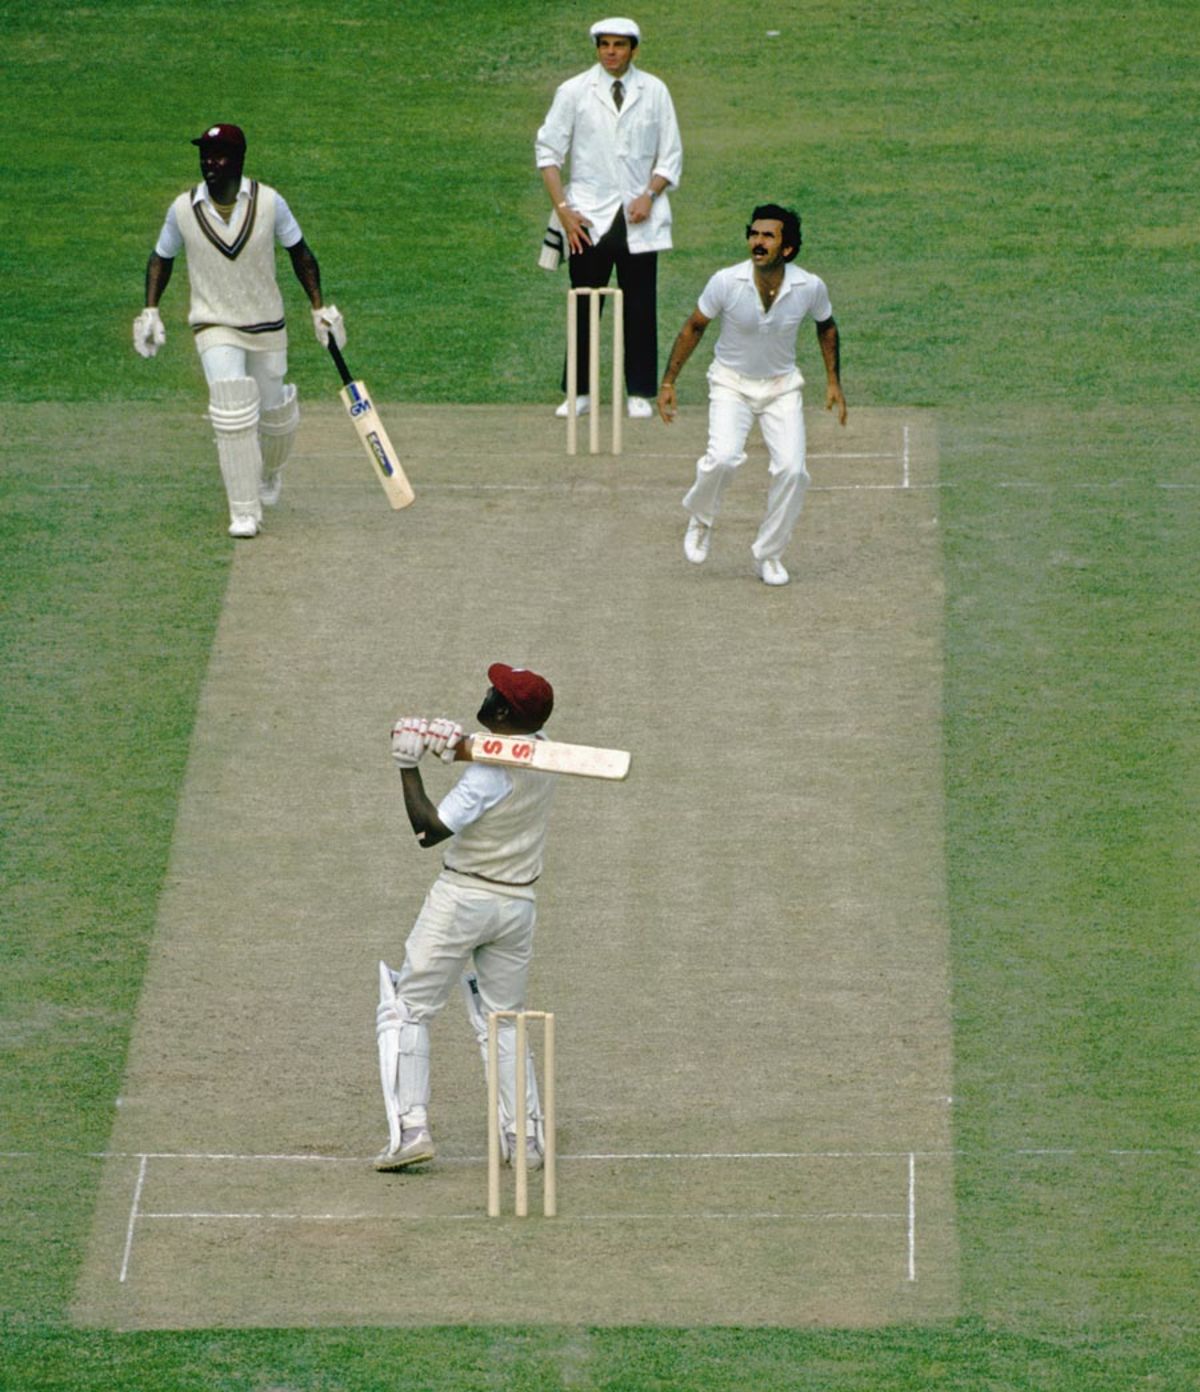 Viv Richards holes out to Kapil Dev off Madan Lal, India v West Indies, 1983 World Cup final, Lord's, June 25, 1983 